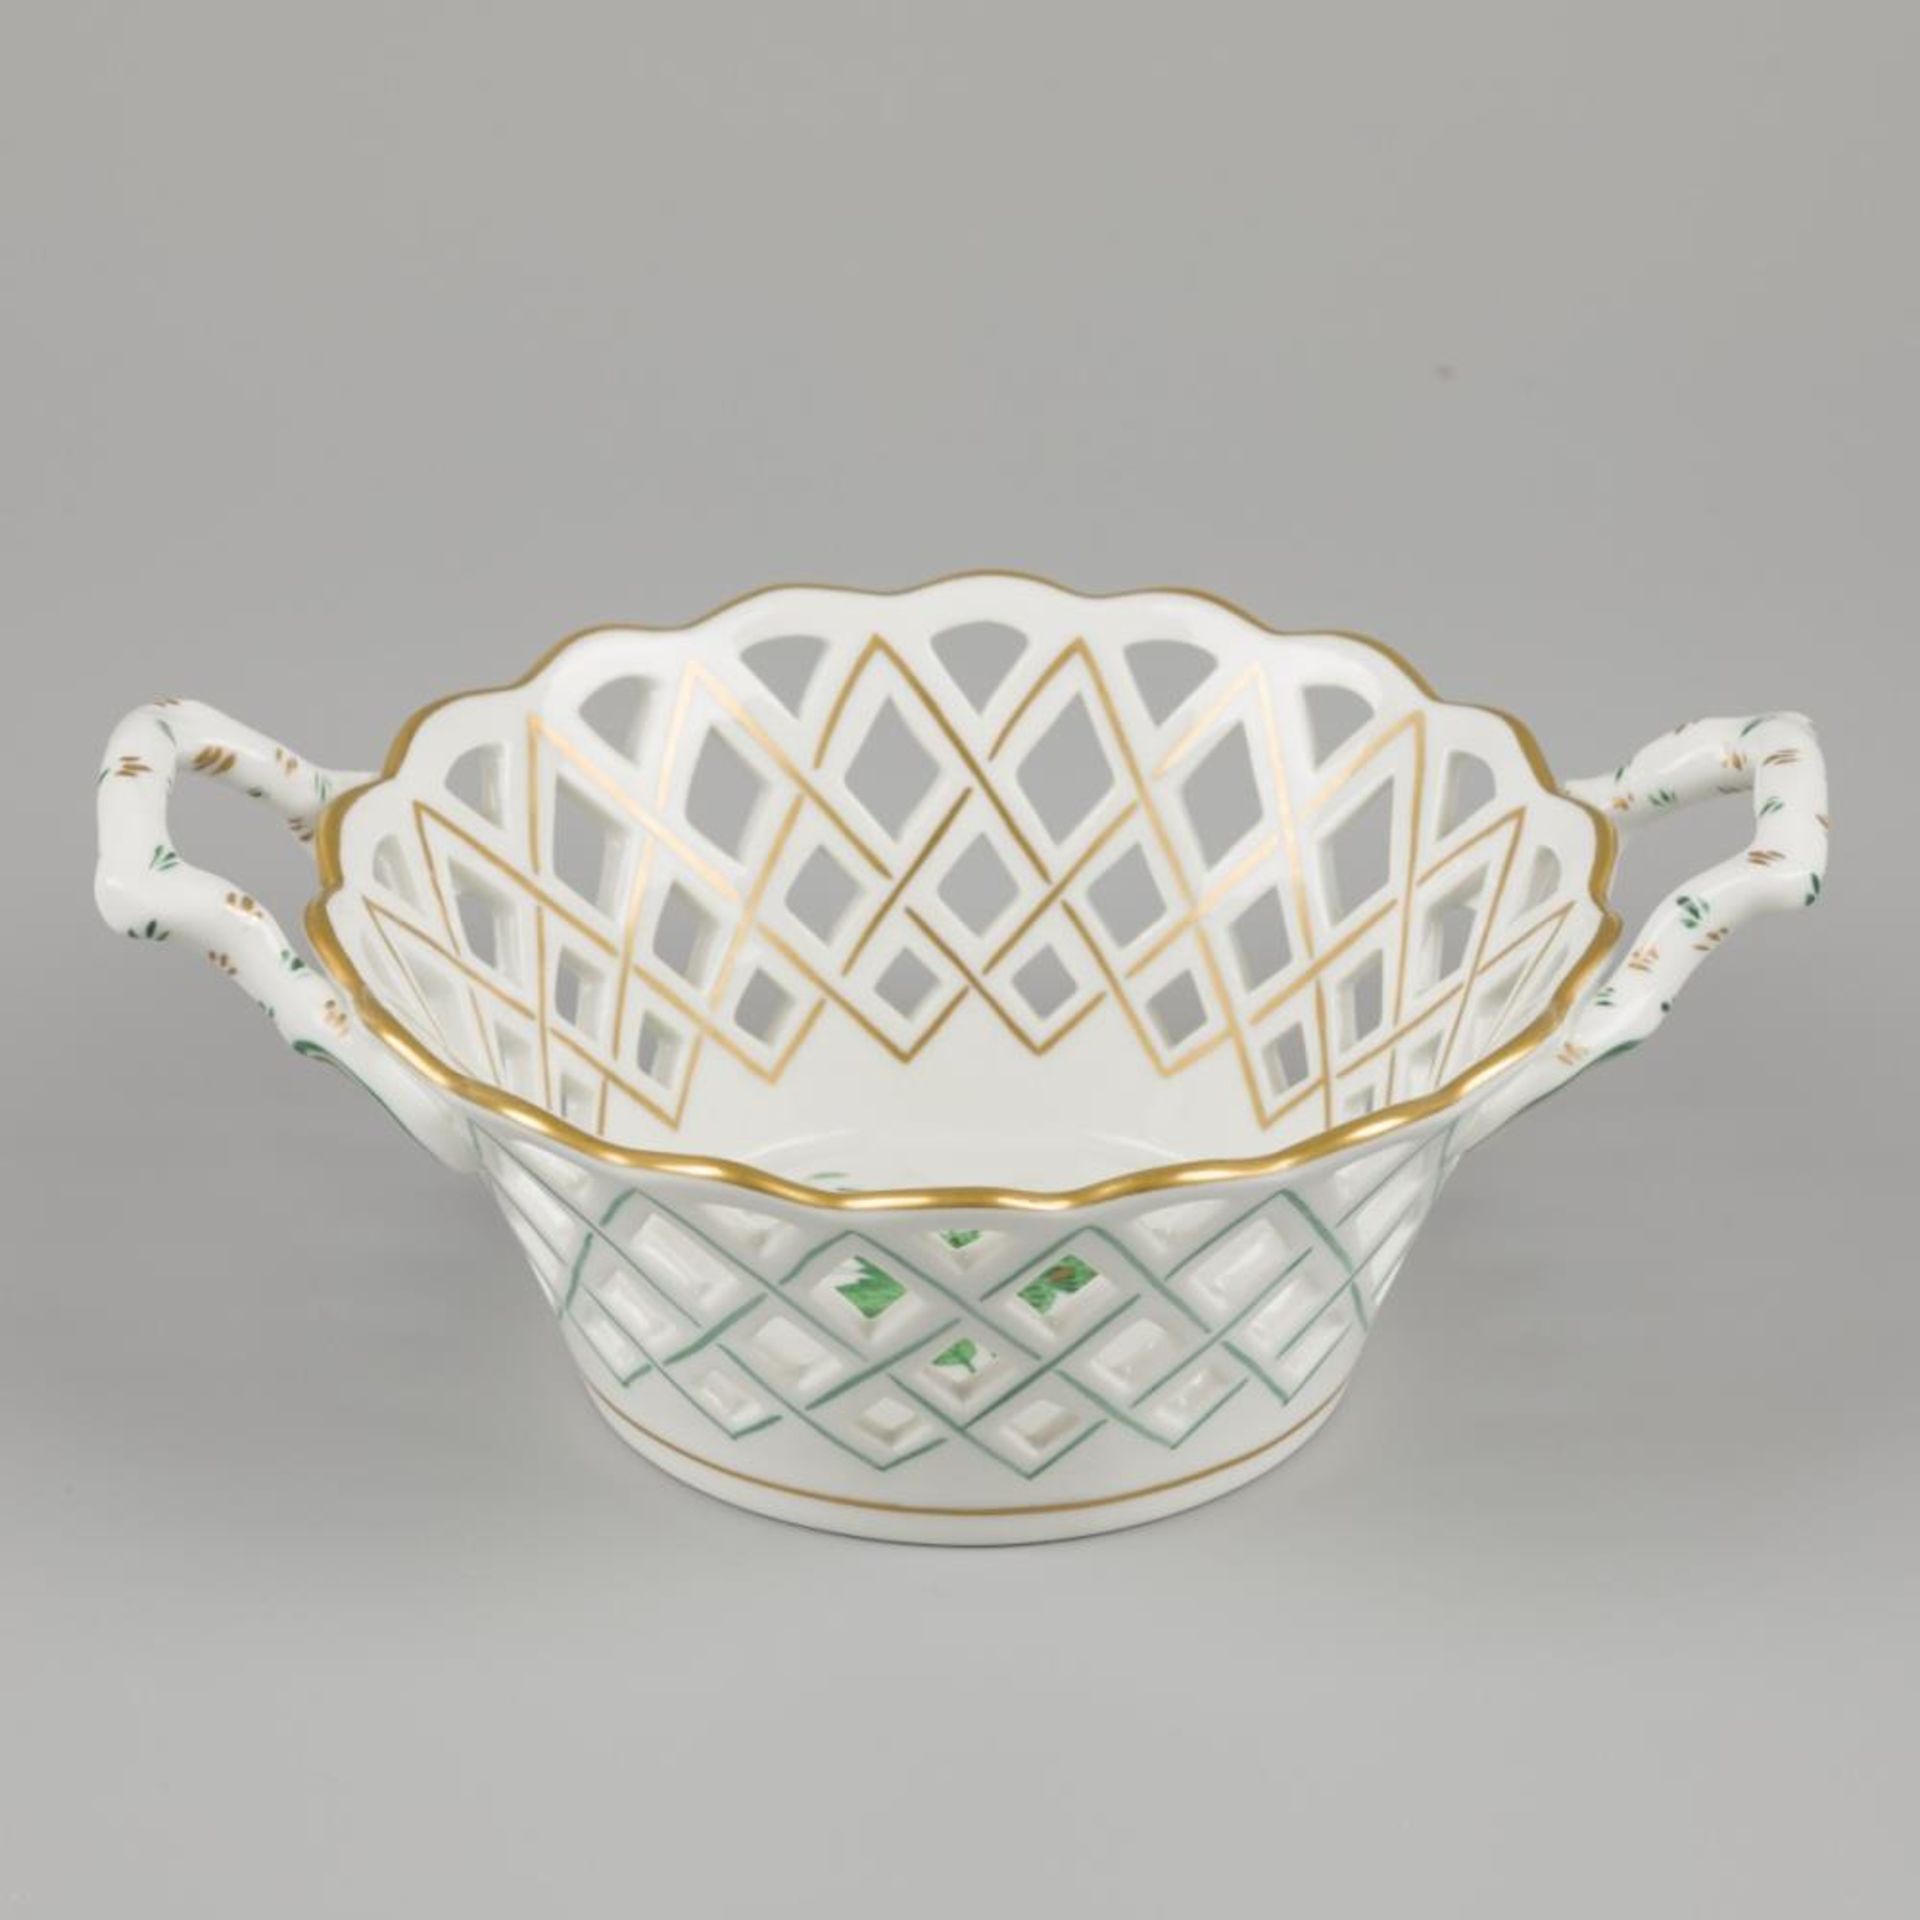 A porcelain openwork basket with apponyi green decor. Herend, late 20th century.